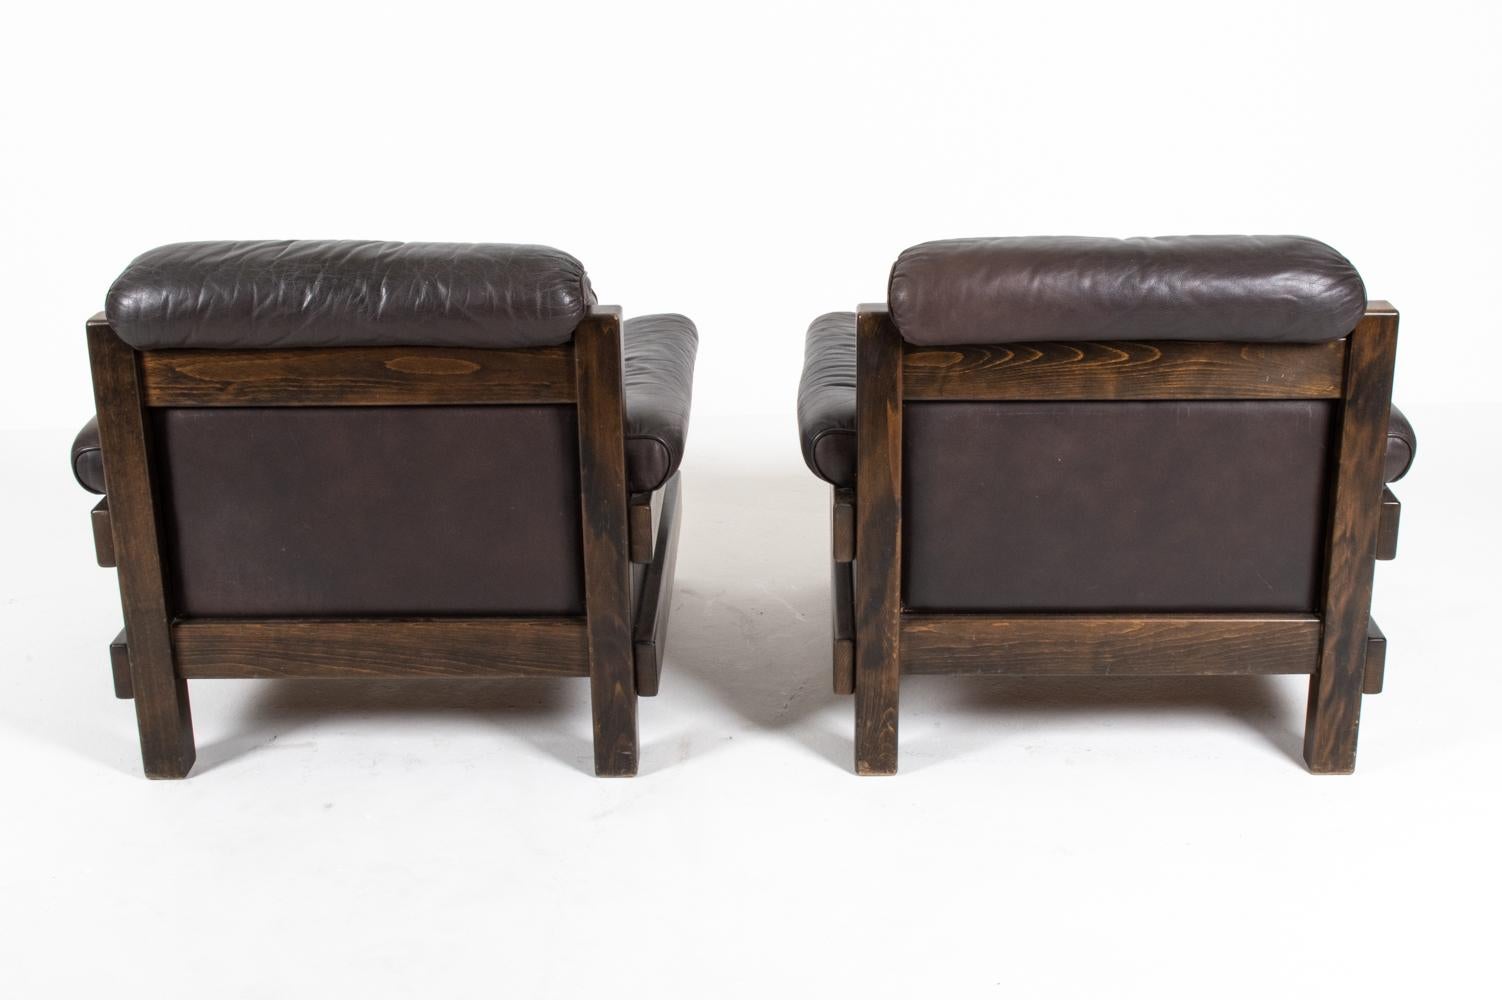 Pair of Swedish Mid-Century Tufted Leather Lounge Chairs by Ikea, 1970's For Sale 5